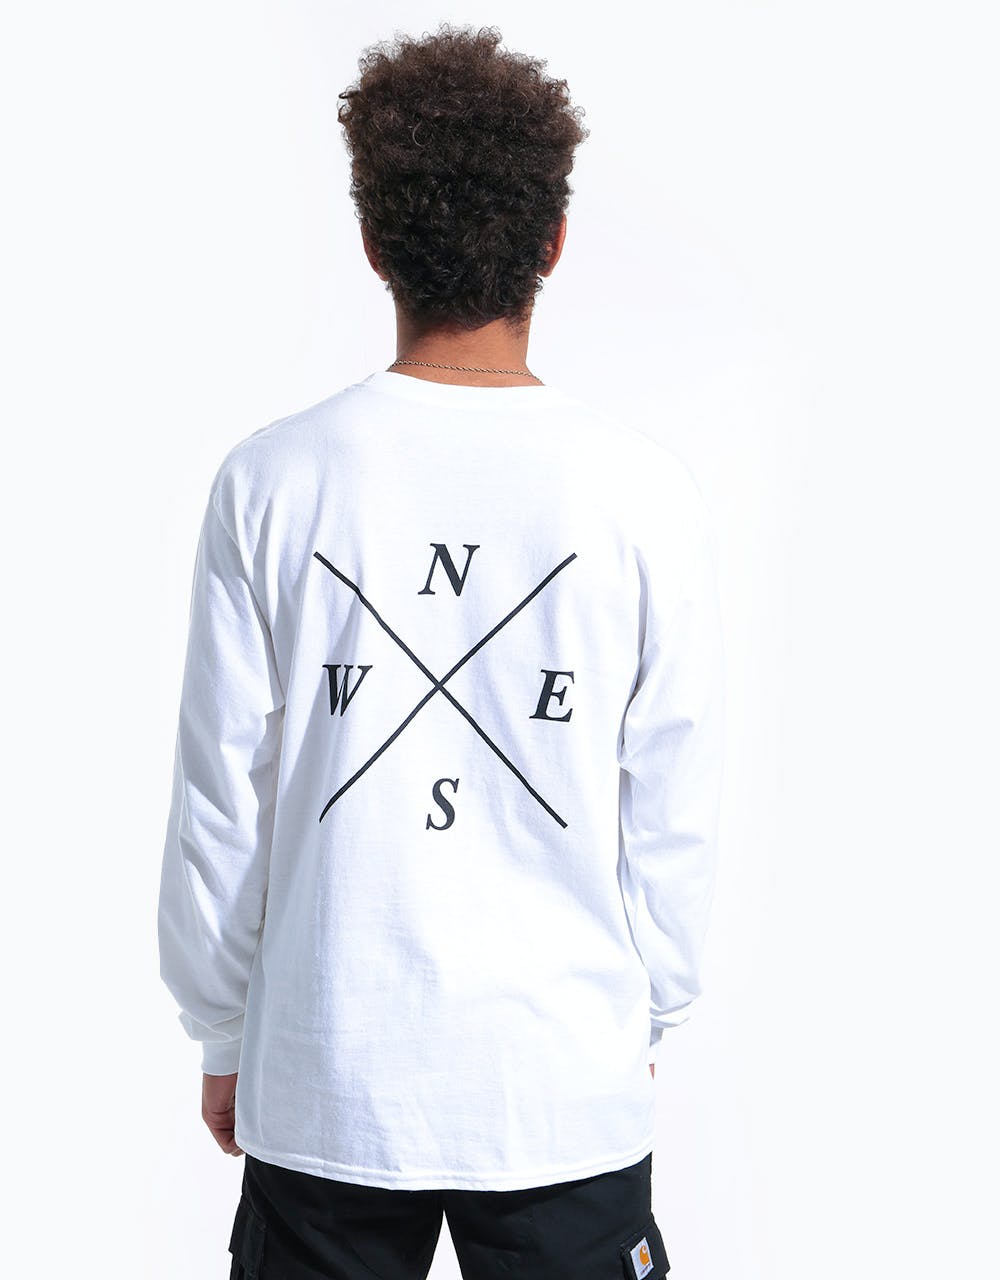 Route One Four Corners LS T-Shirt - White